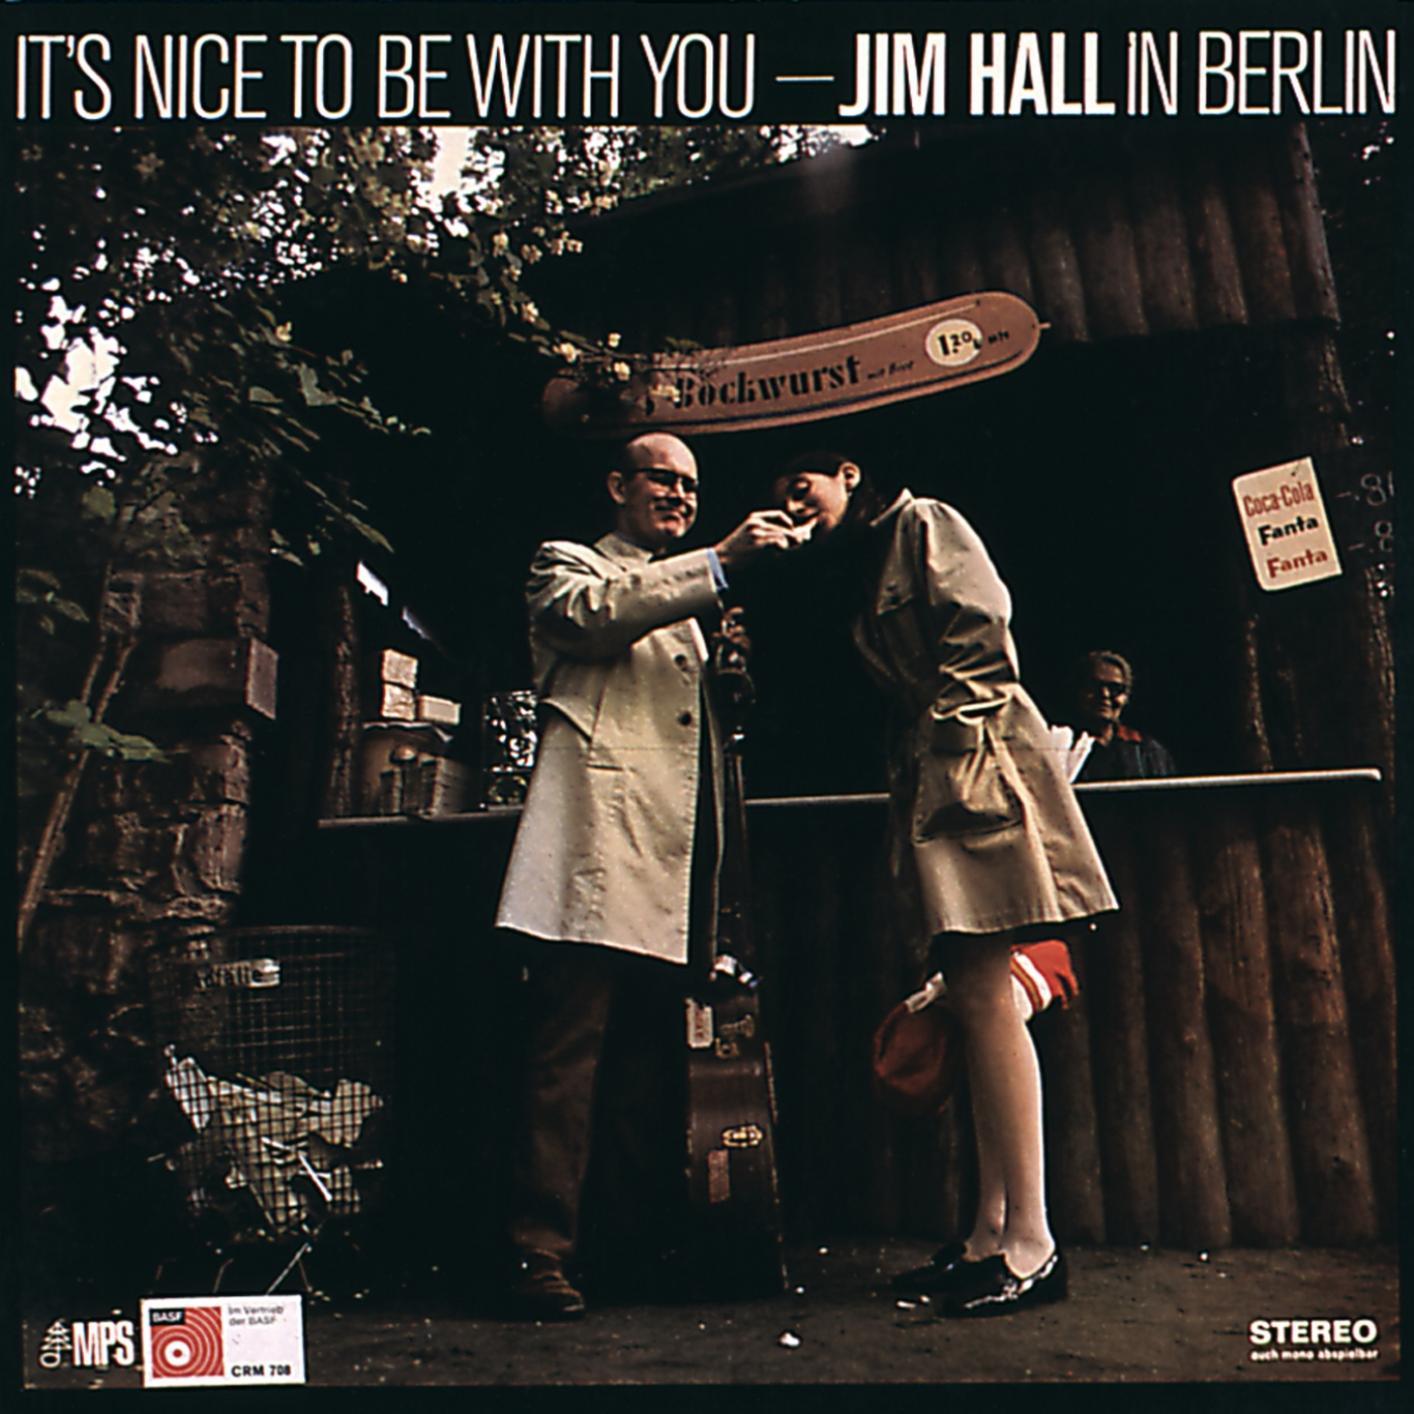 Jim Hall - It’s Nice To Be With You: Jim Hall In Berlin (1969/2015) [HighResAudio FLAC 24bit/88,2kHz]